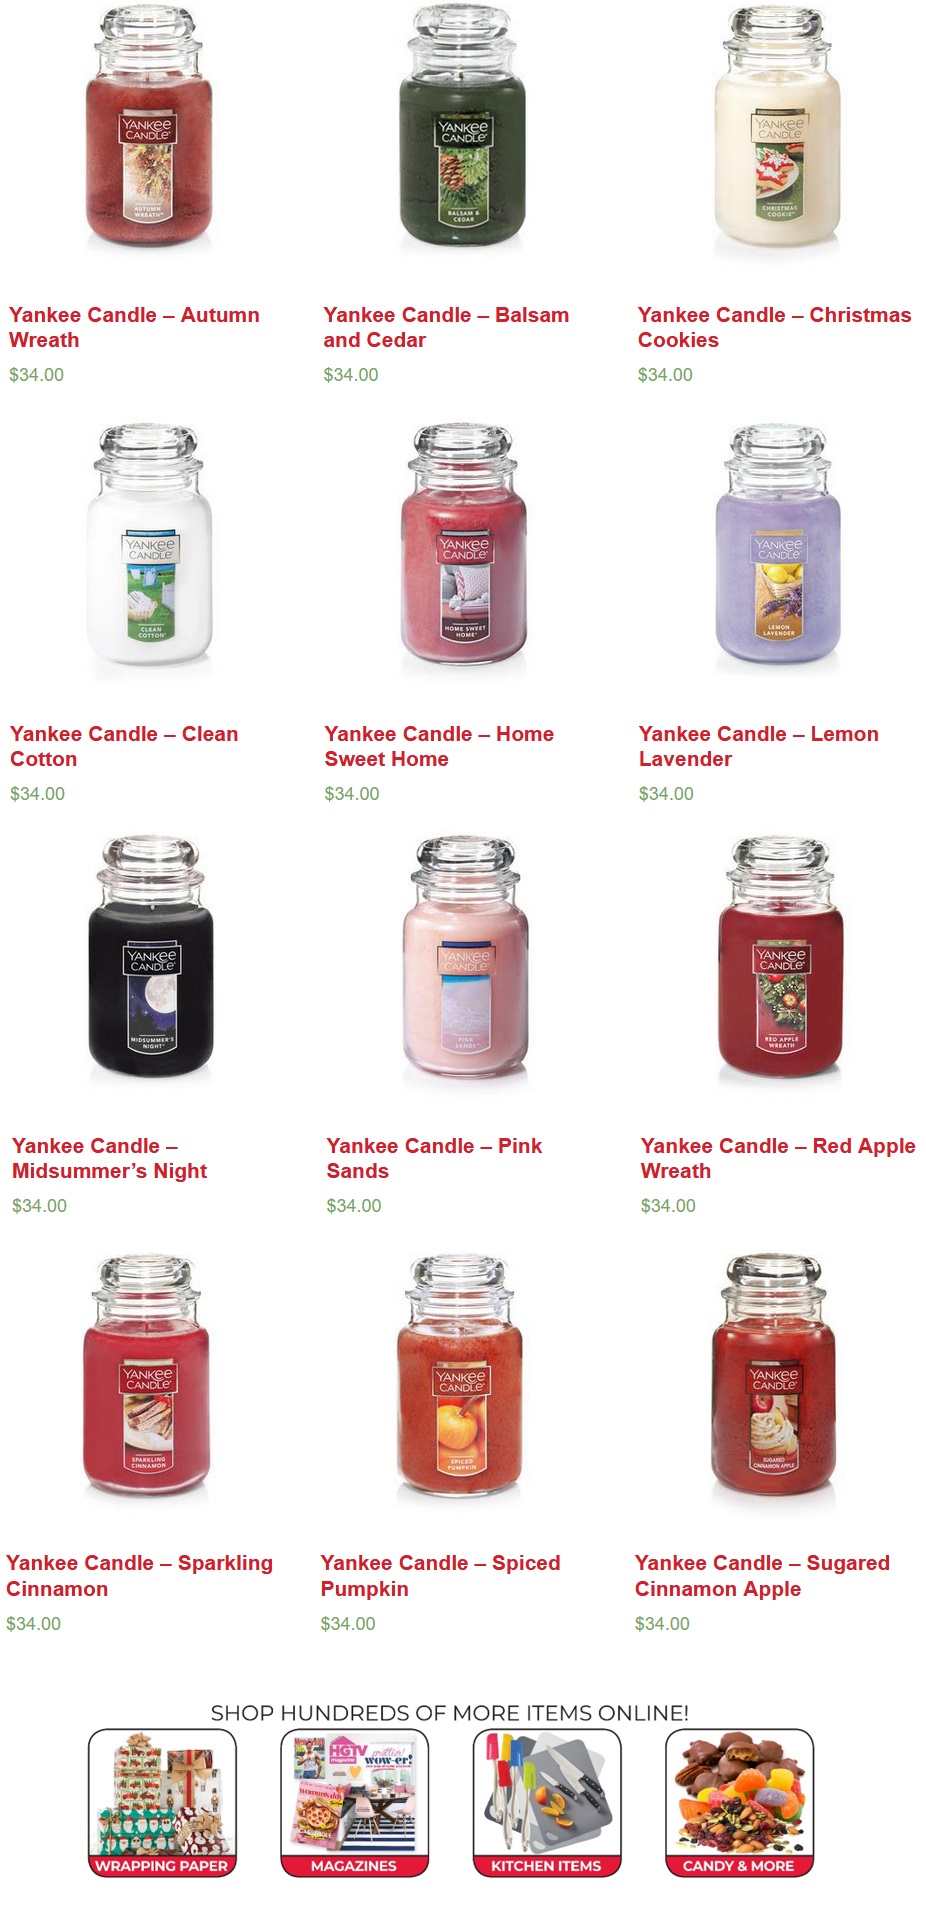 Yankee Candle Online Store Products